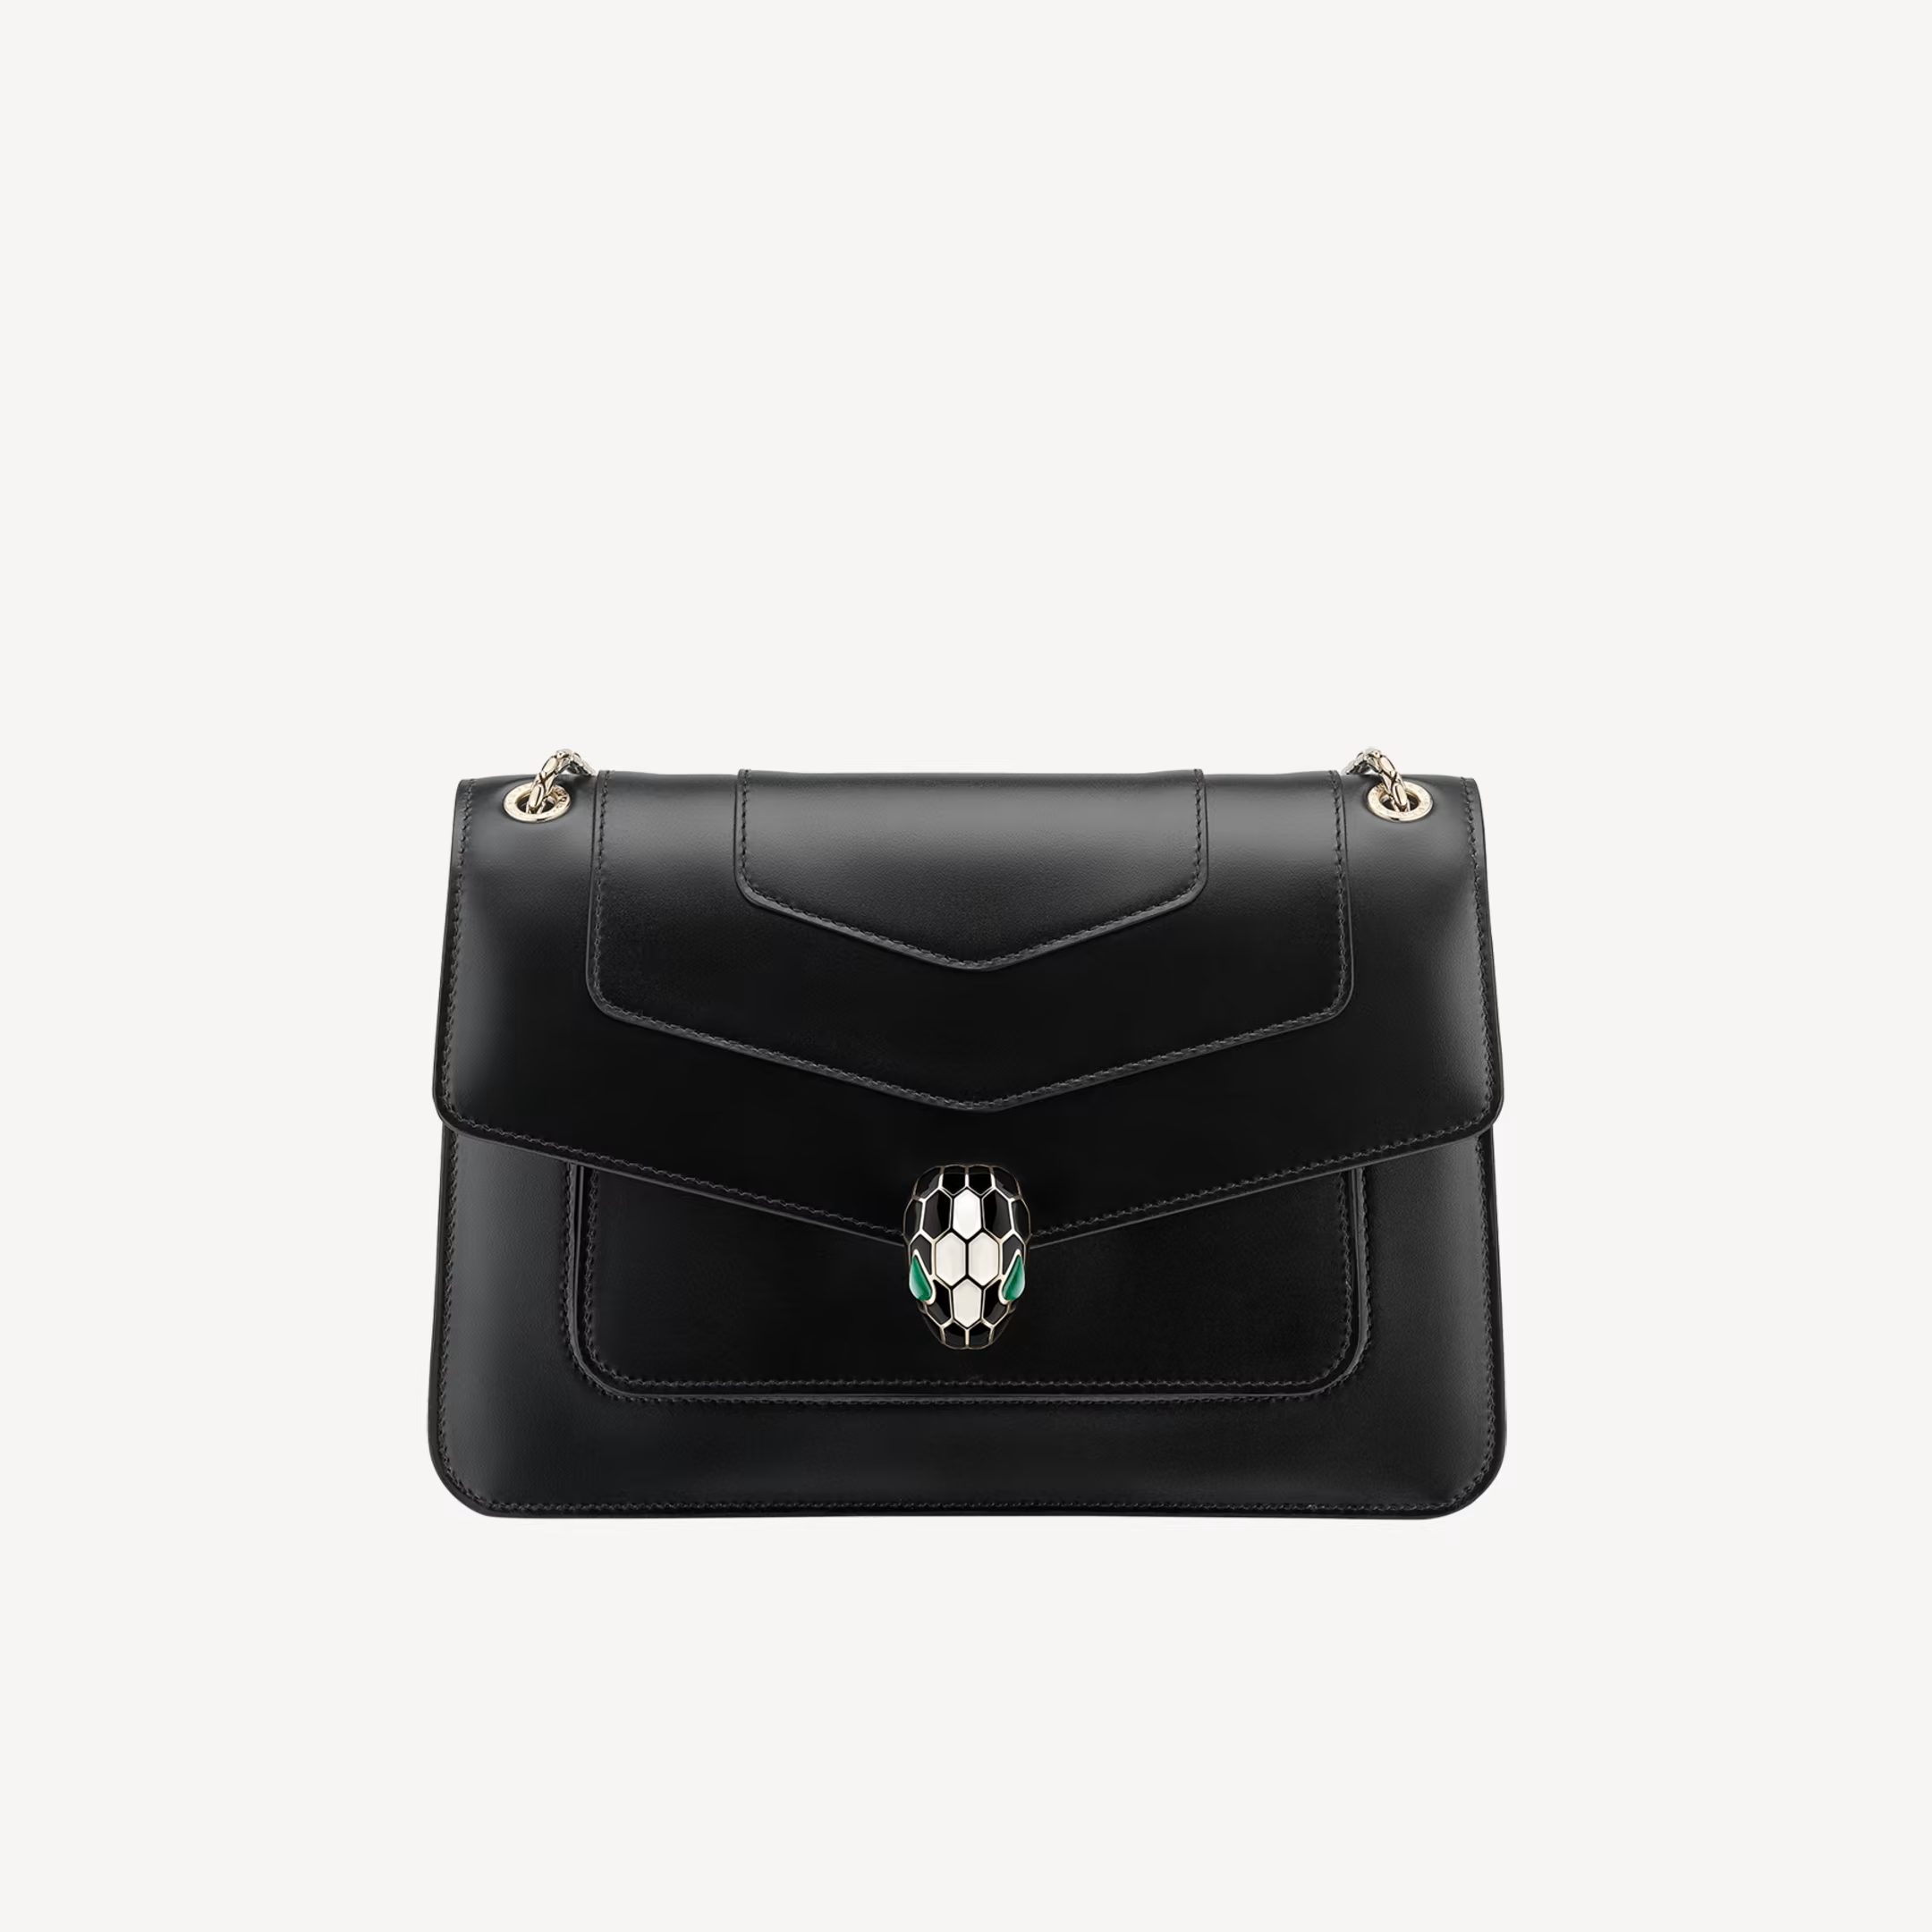 BVLGARI serpenti bags are SO underrated. What's your opinion on their bags?  : r/handbags